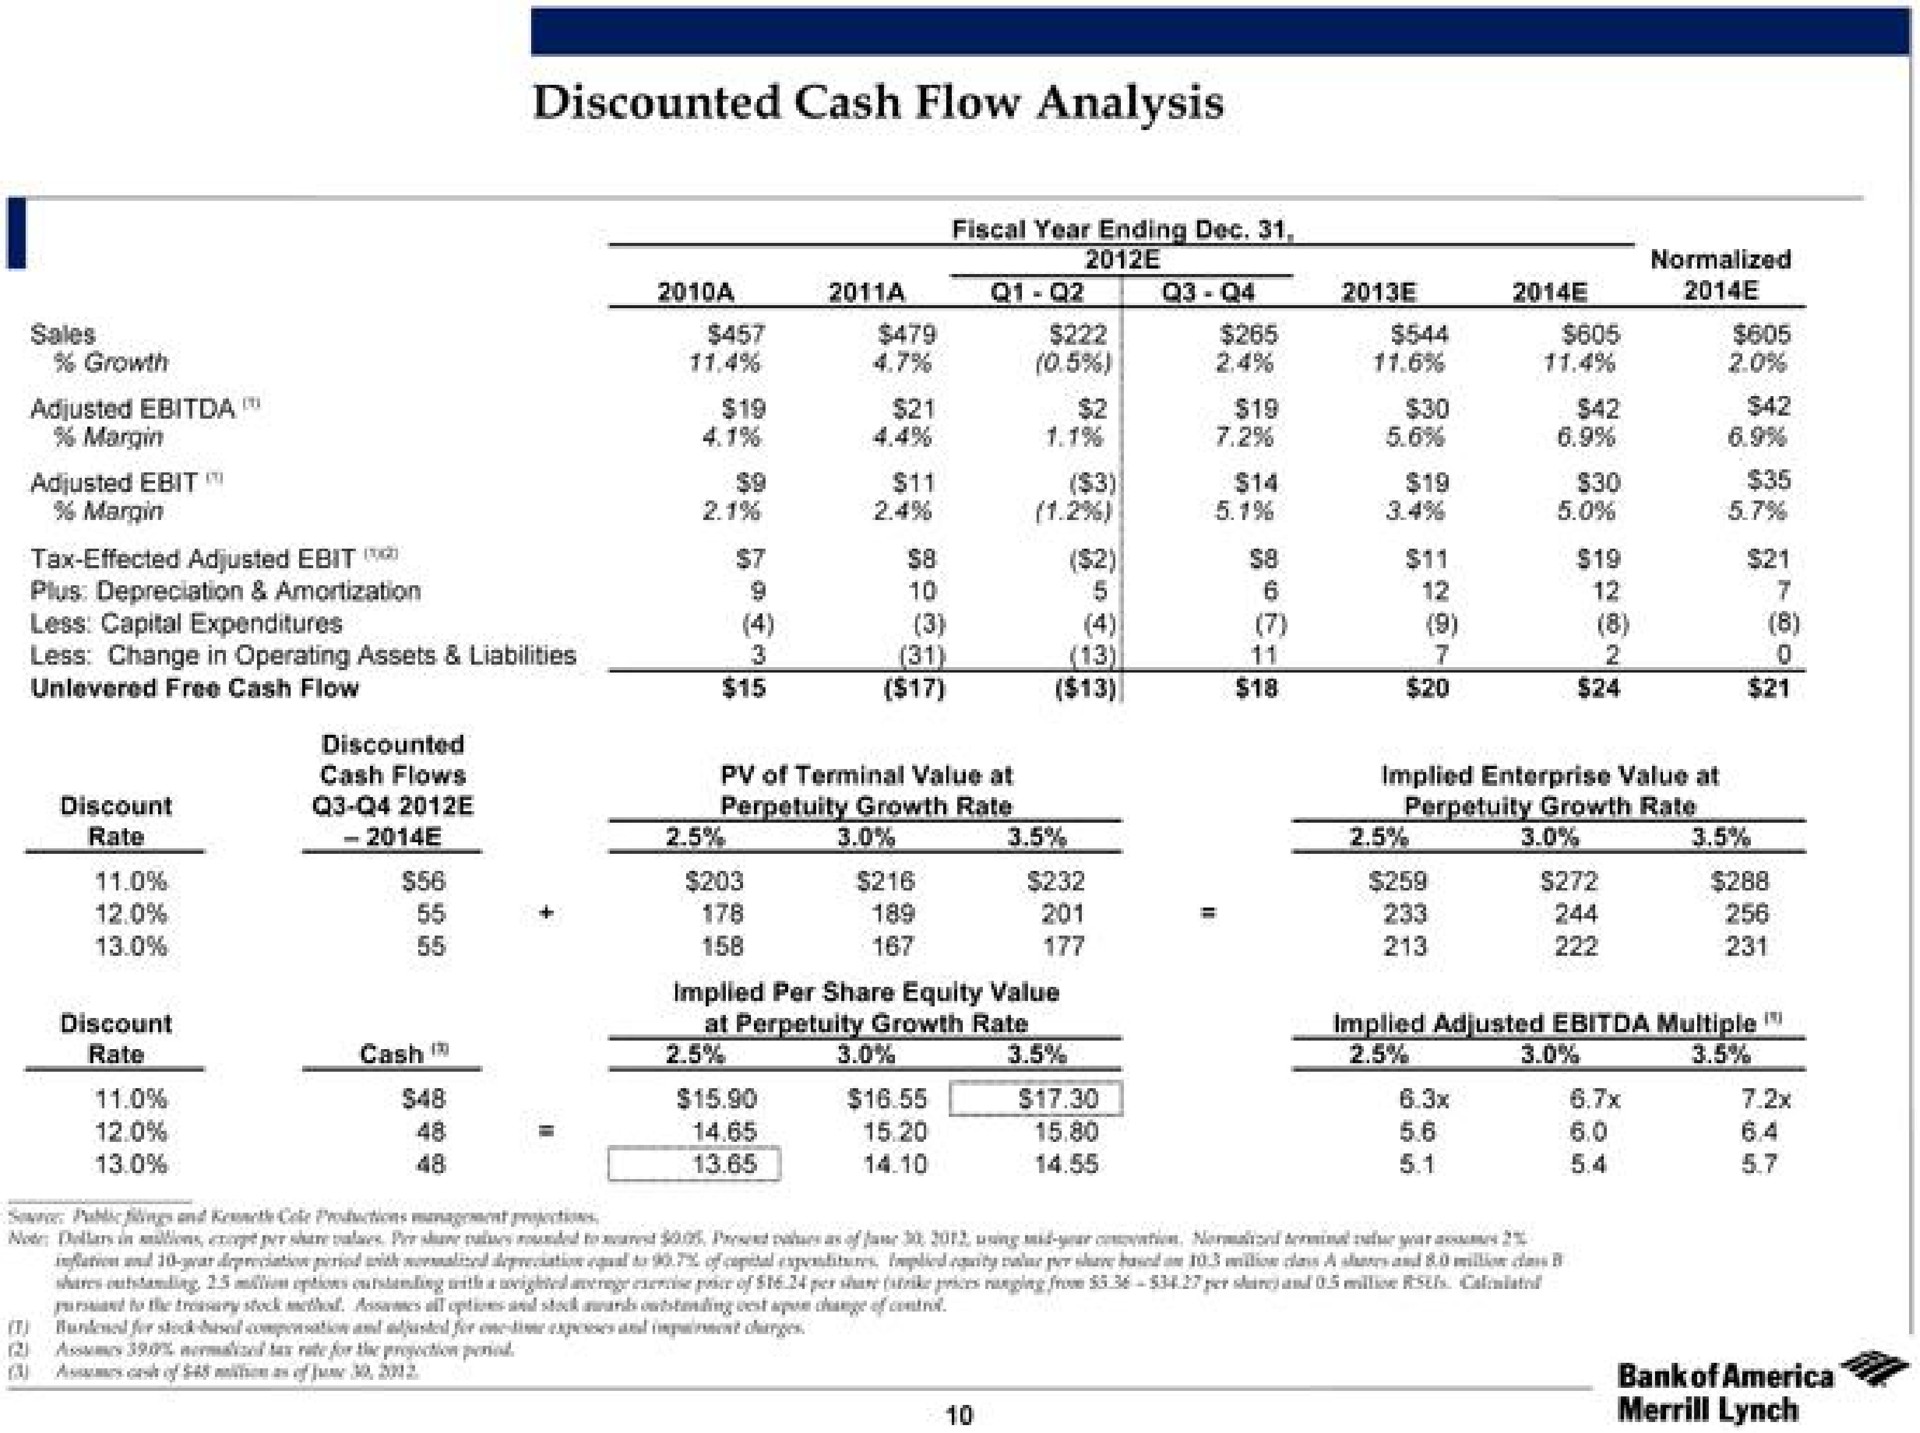 discounted cash flow analysis | Bank of America